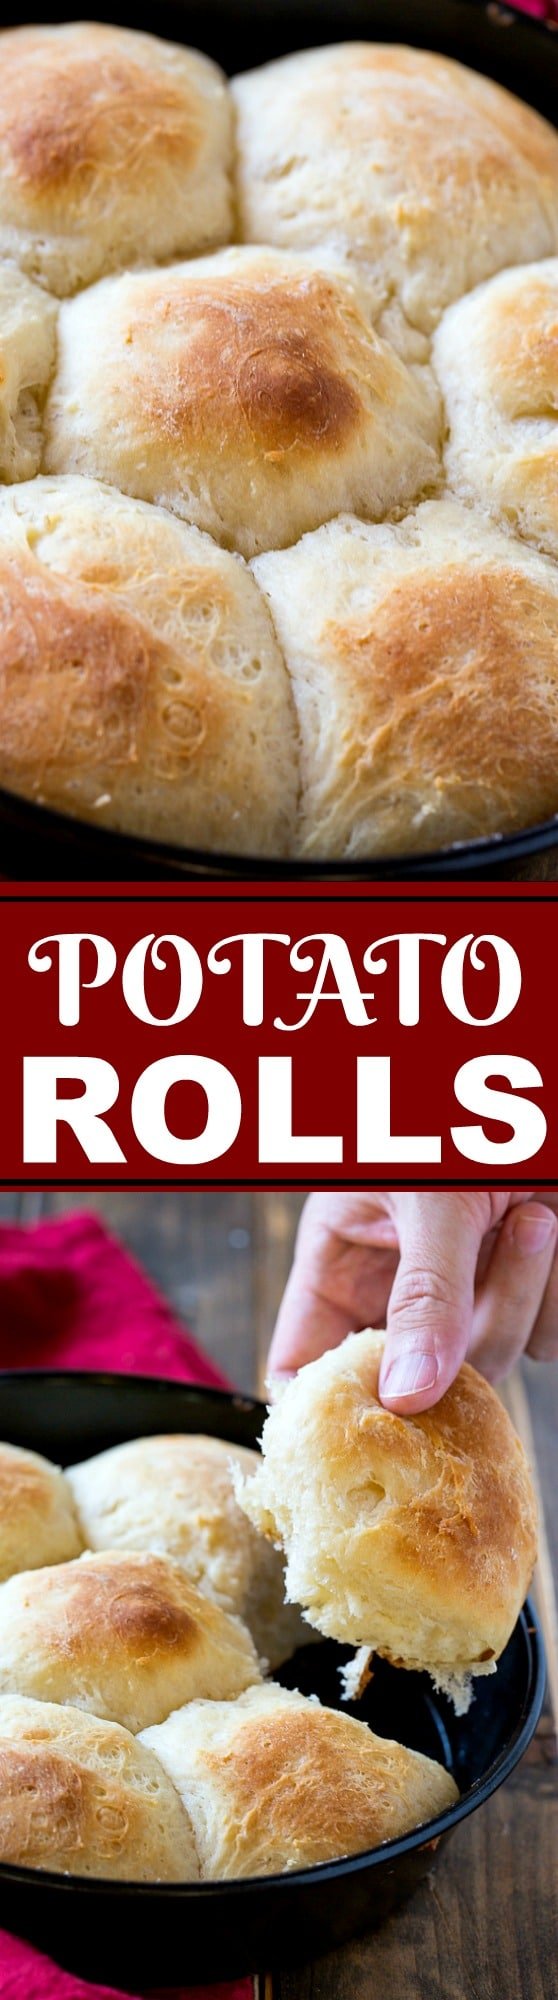 These Potato Rolls are made from leftover mashed potatoes.